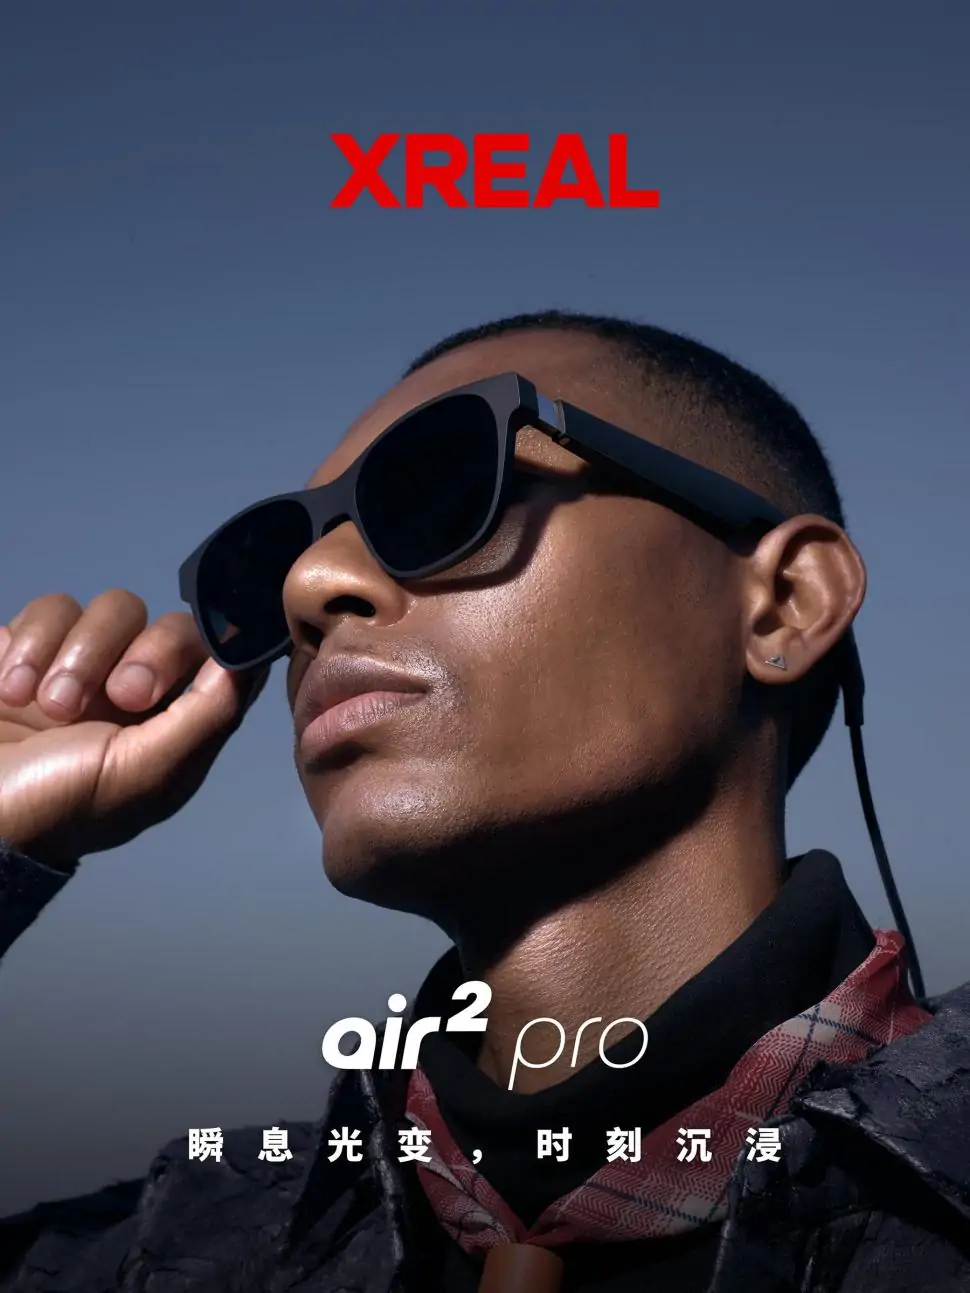 Xreal unveils next-generation AR headsets featuring major upgrades